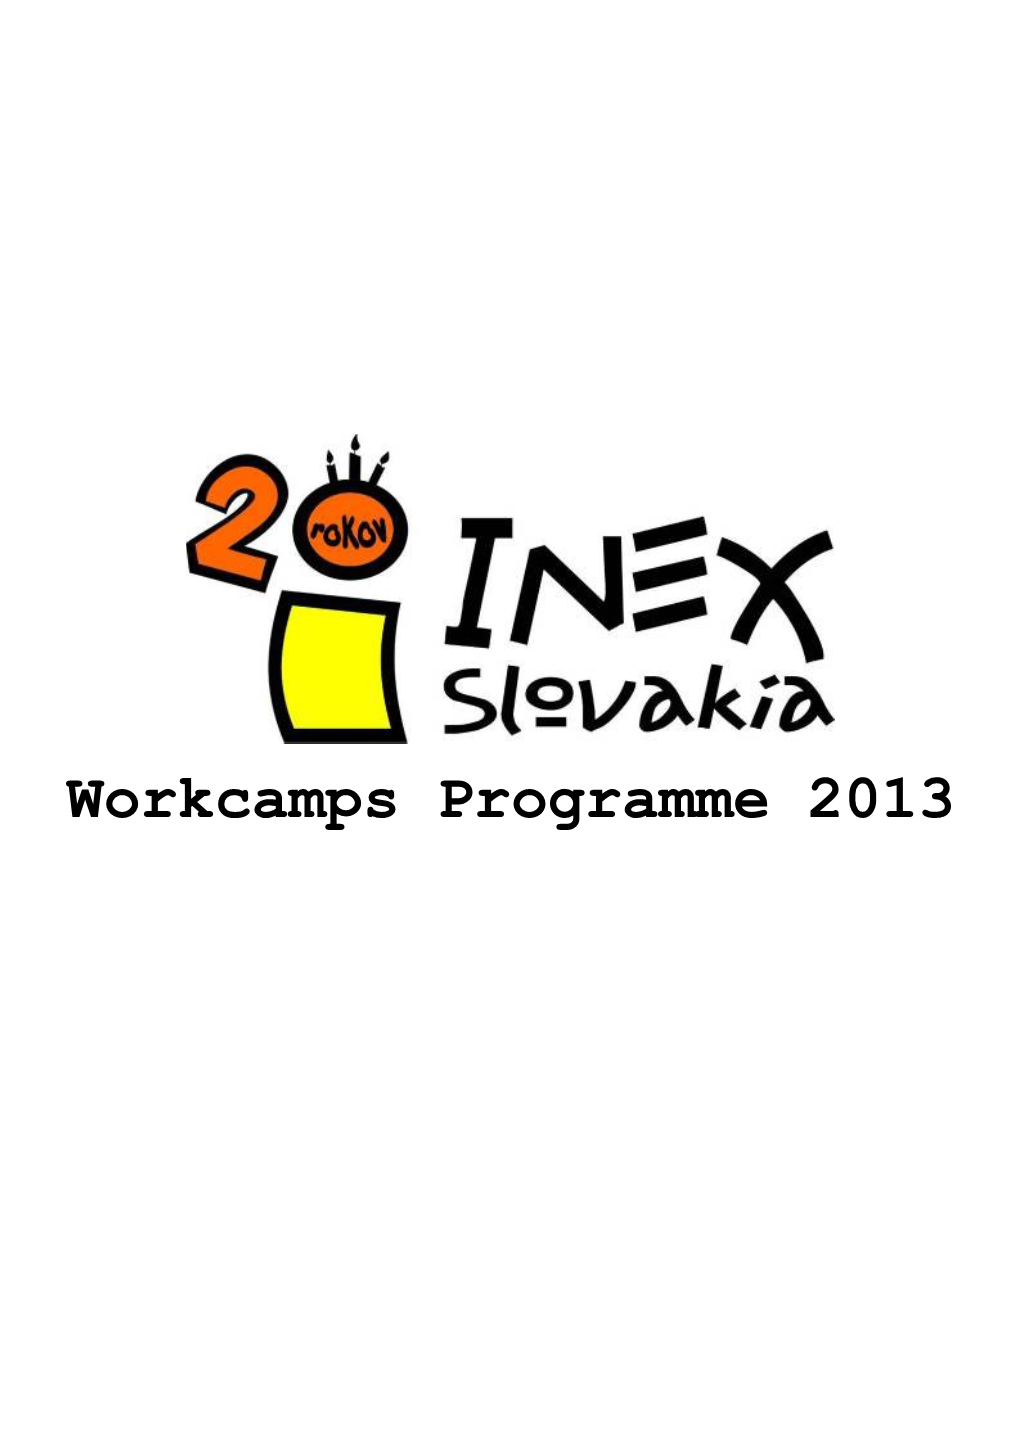 THE LIST of WORKCAMPS 2013 of INEX SLOVAKIA